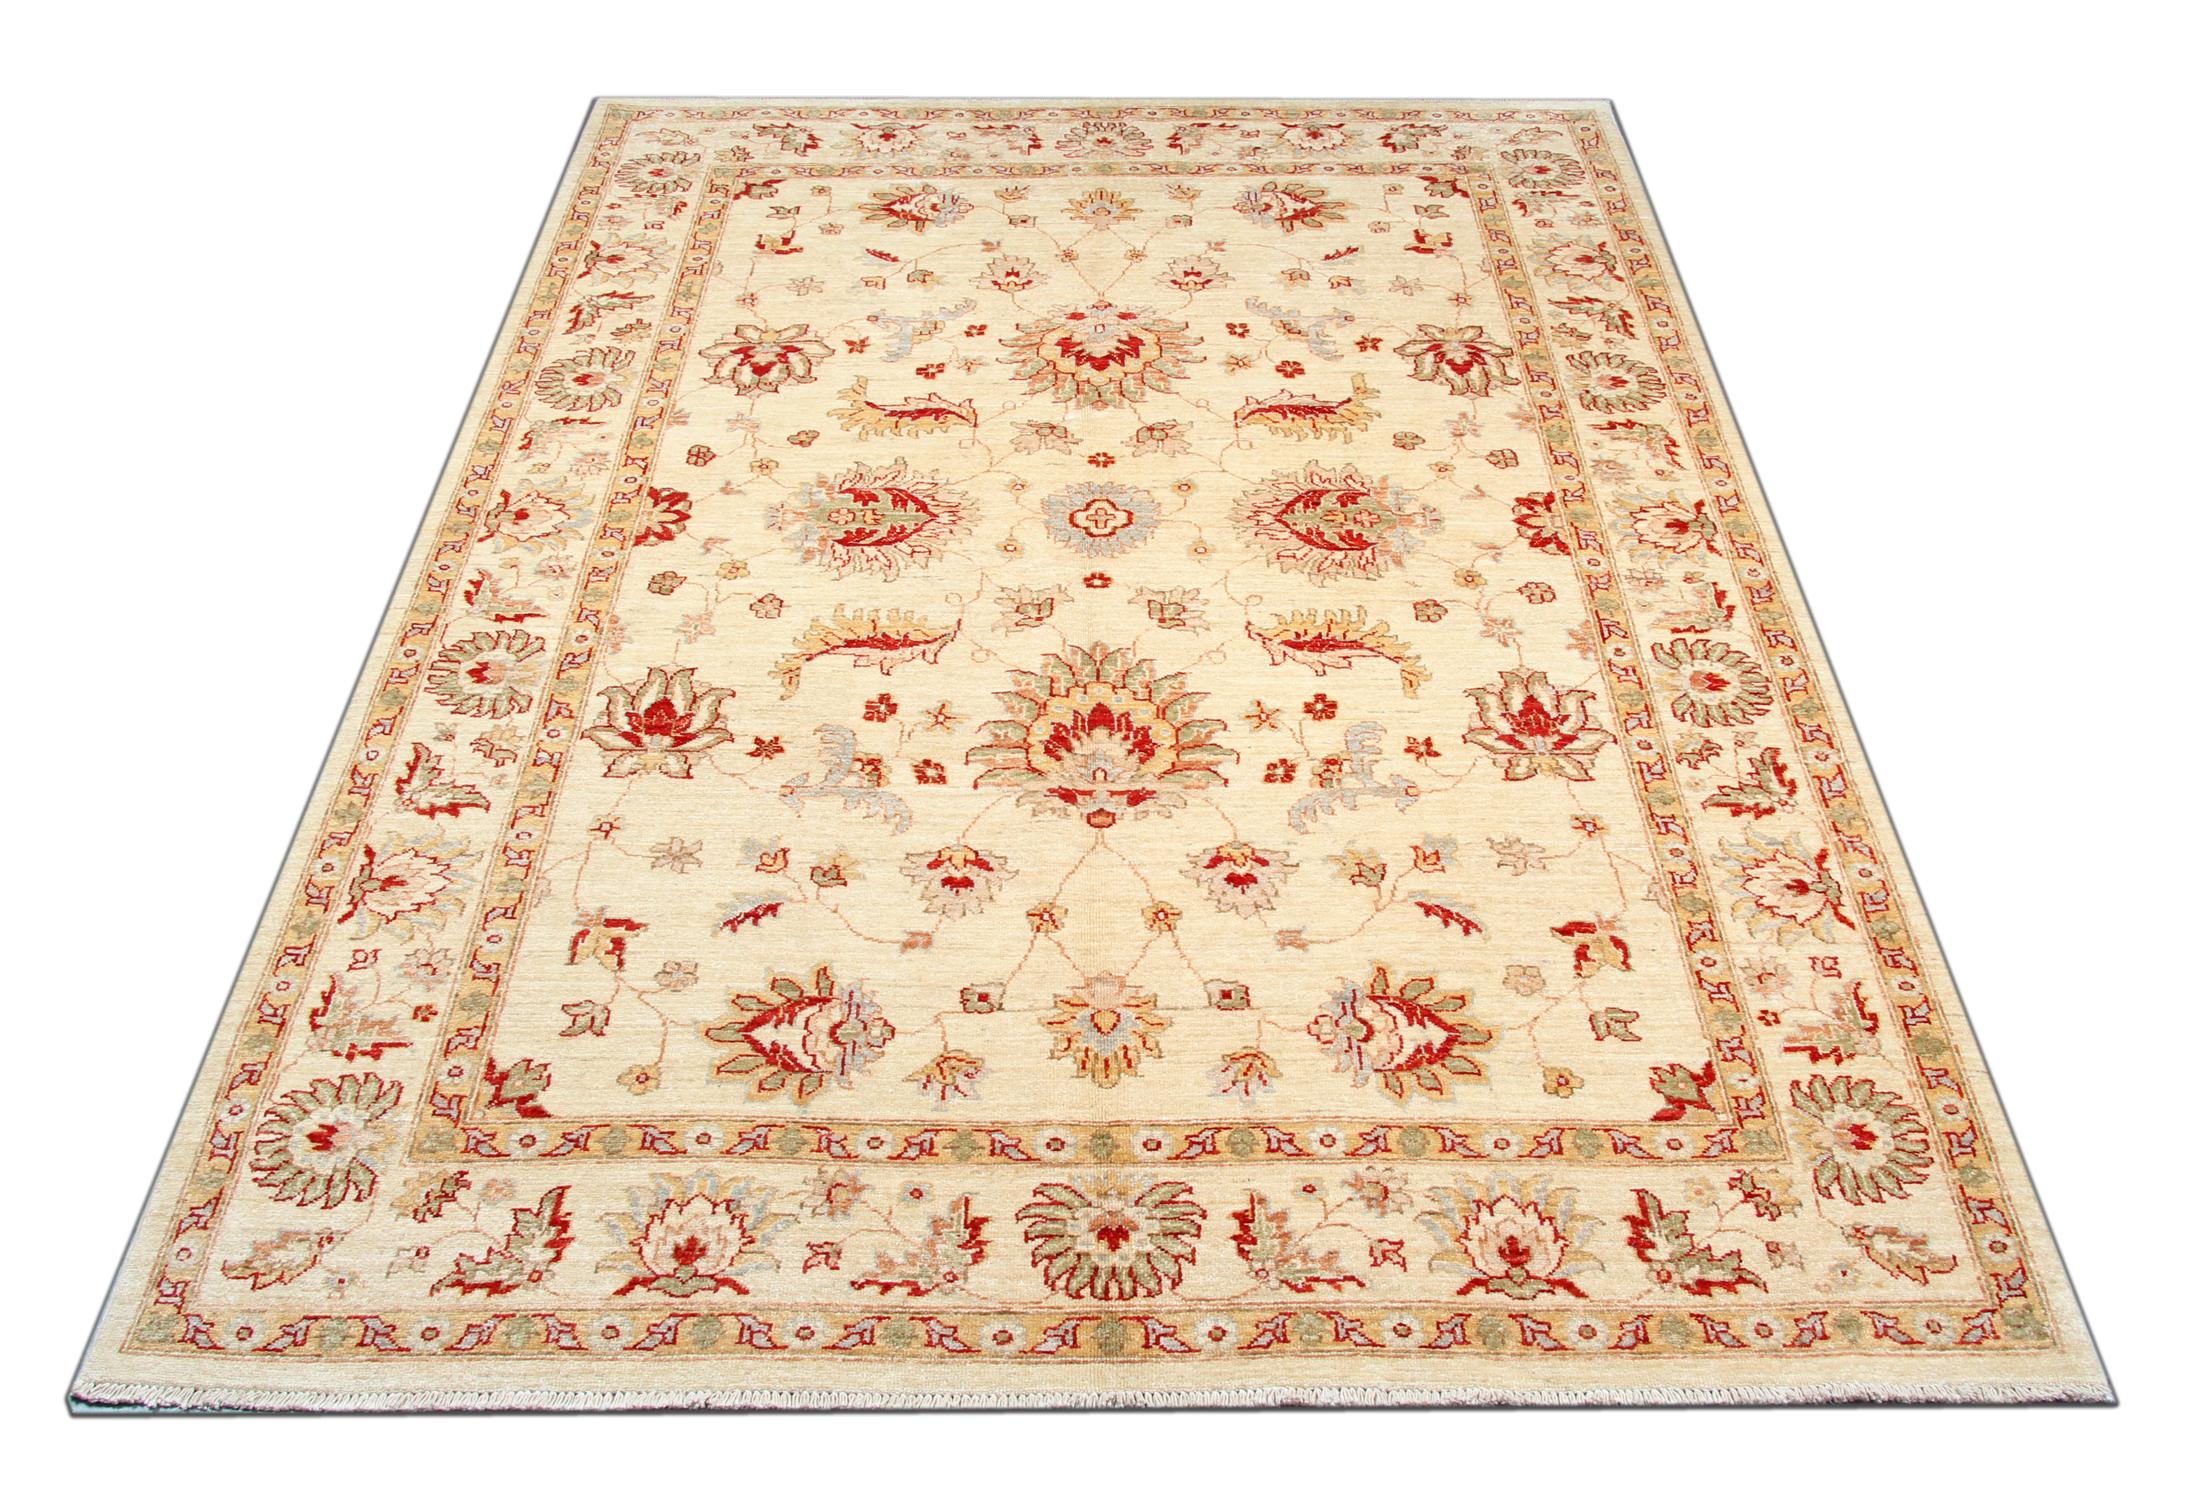 This rug is a Ziegler Sultanabad rug made on our looms by our master weavers in Afghanistan. It is handmade with all-natural veg dyes all hand-spun wool. The large-scale design makes Sultanabad regarded as the most appealing to European and American